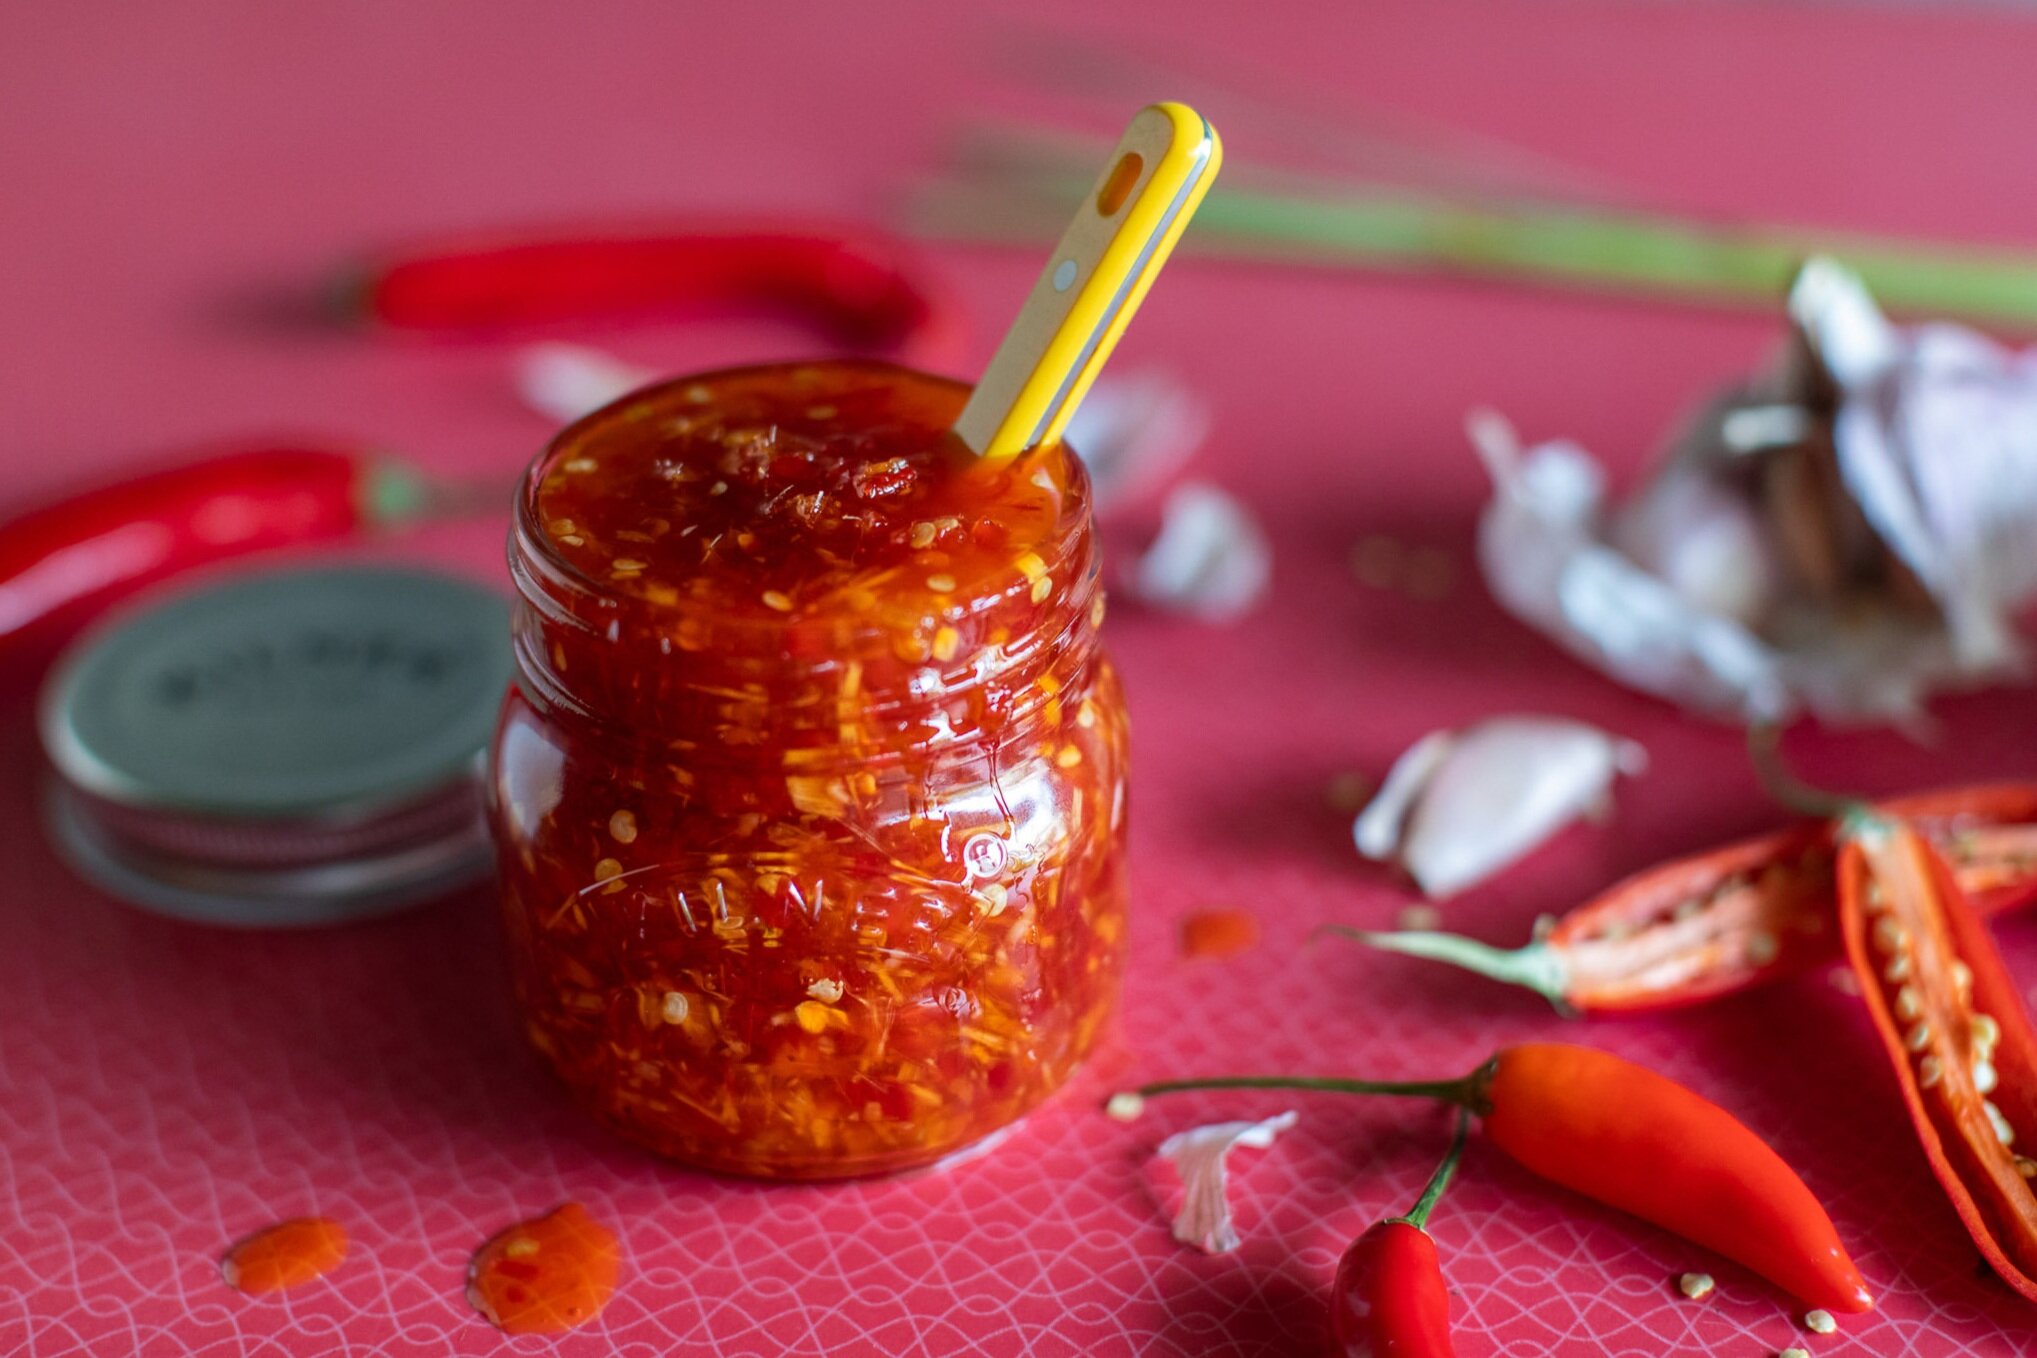 My Not-too-sweet Chilli Sauce